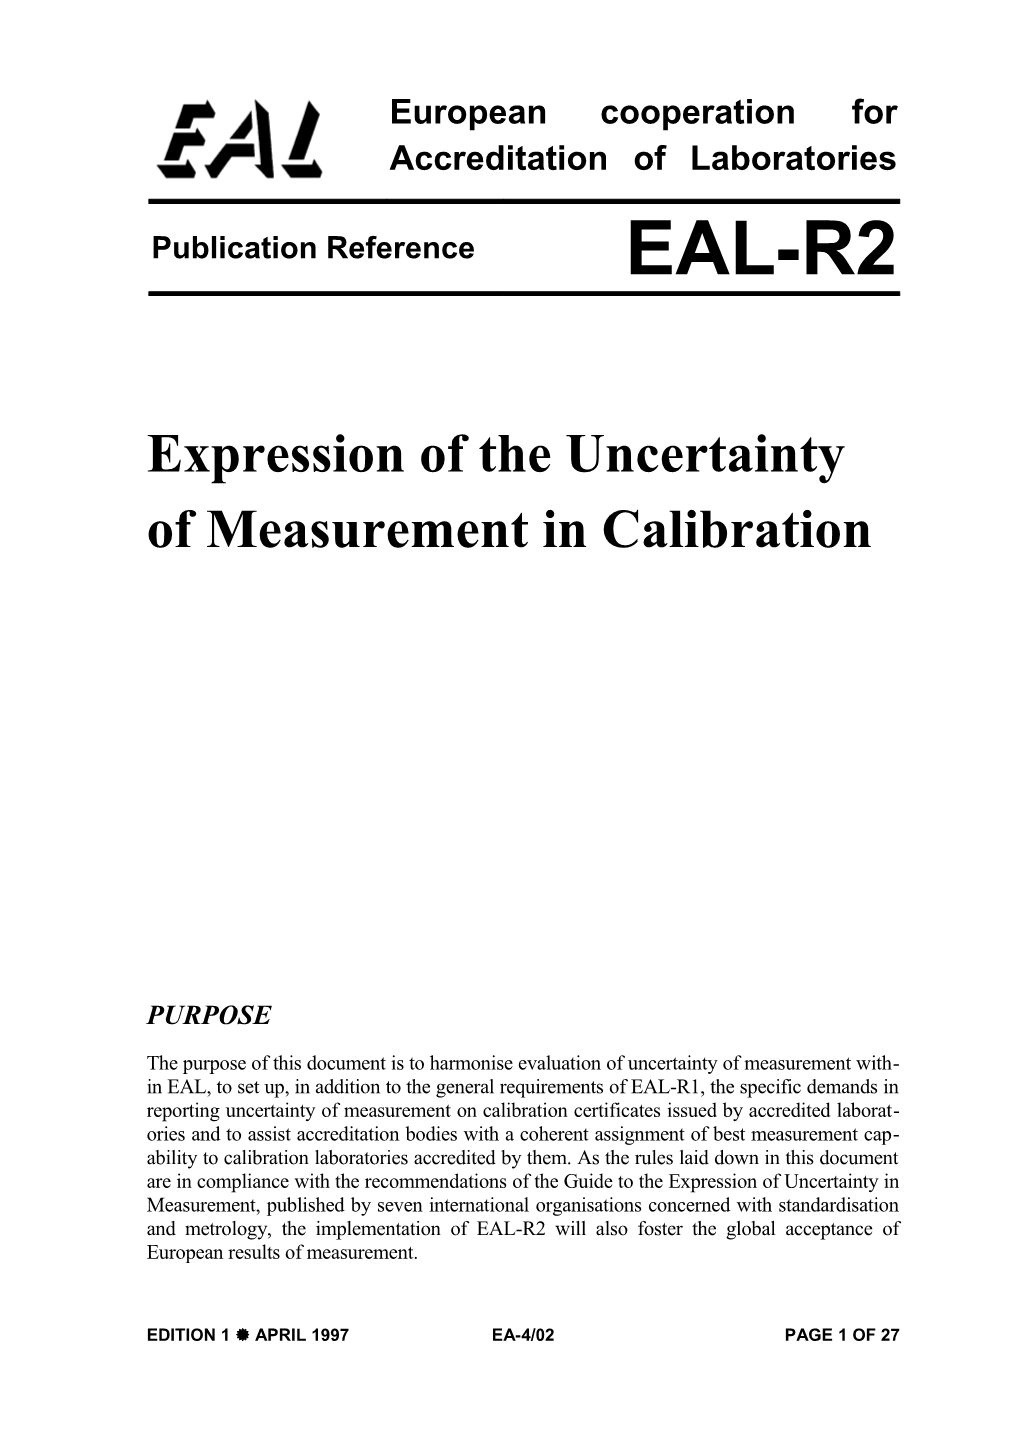 Guidelines for the Expression of the Uncertainty of Measurement